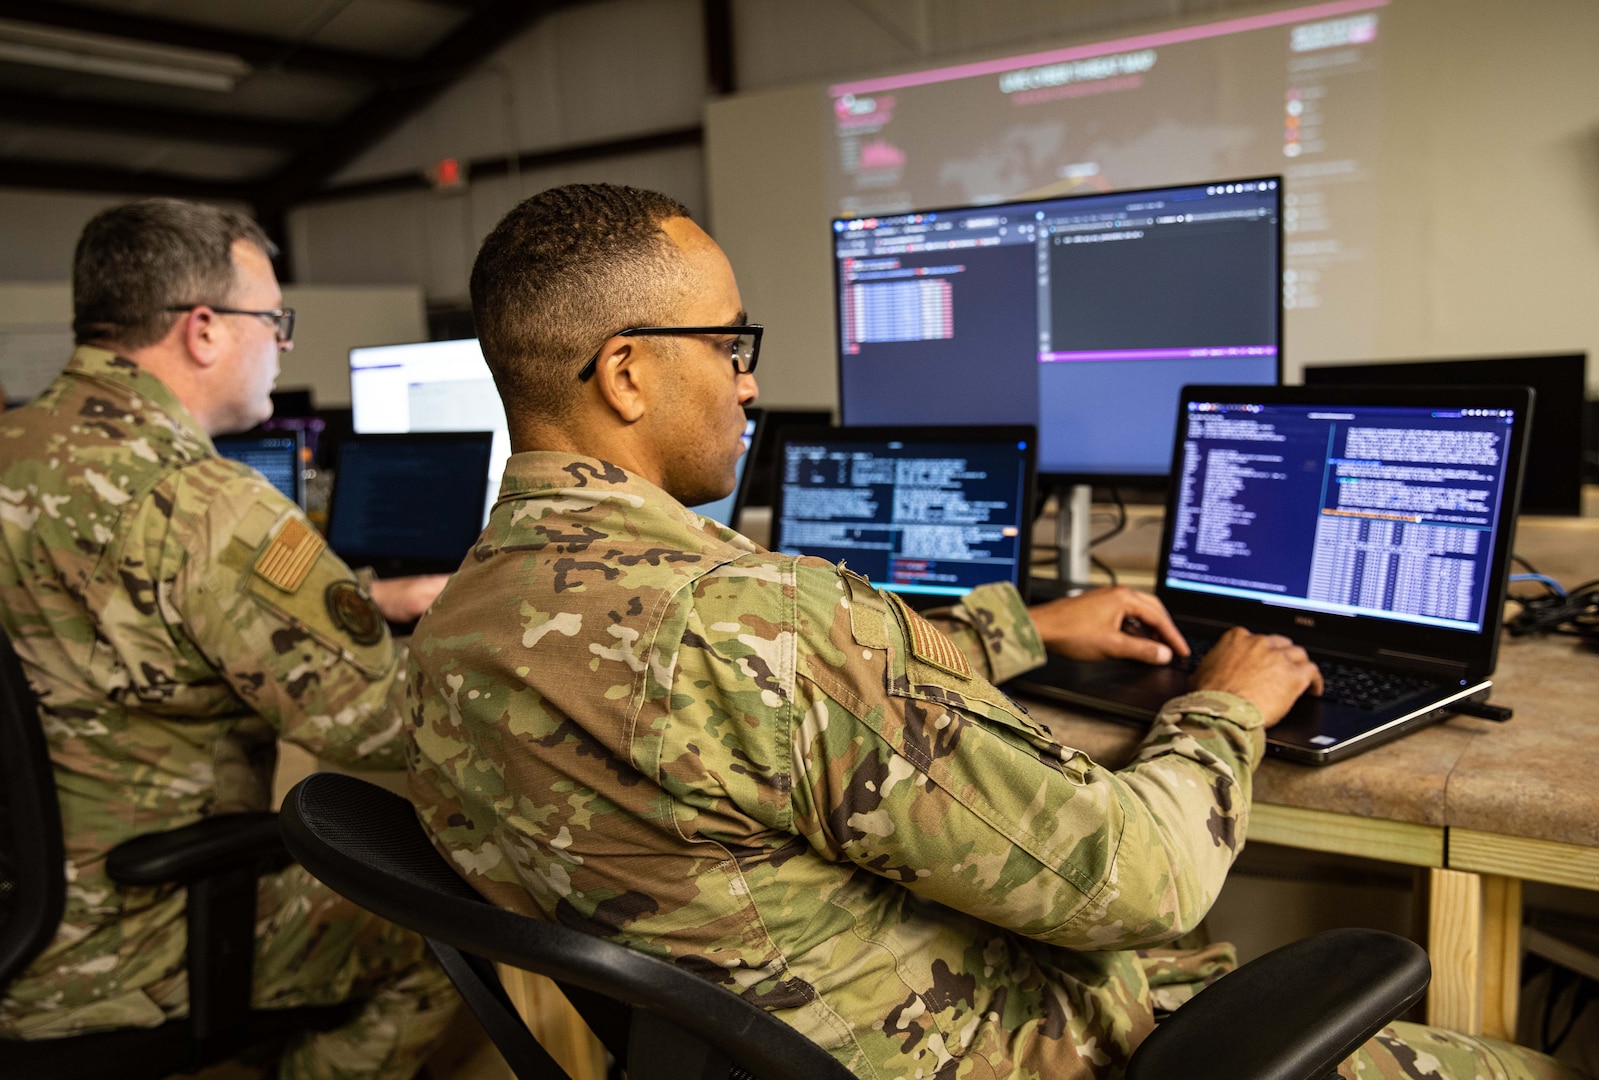 Two service members look at computer screens.